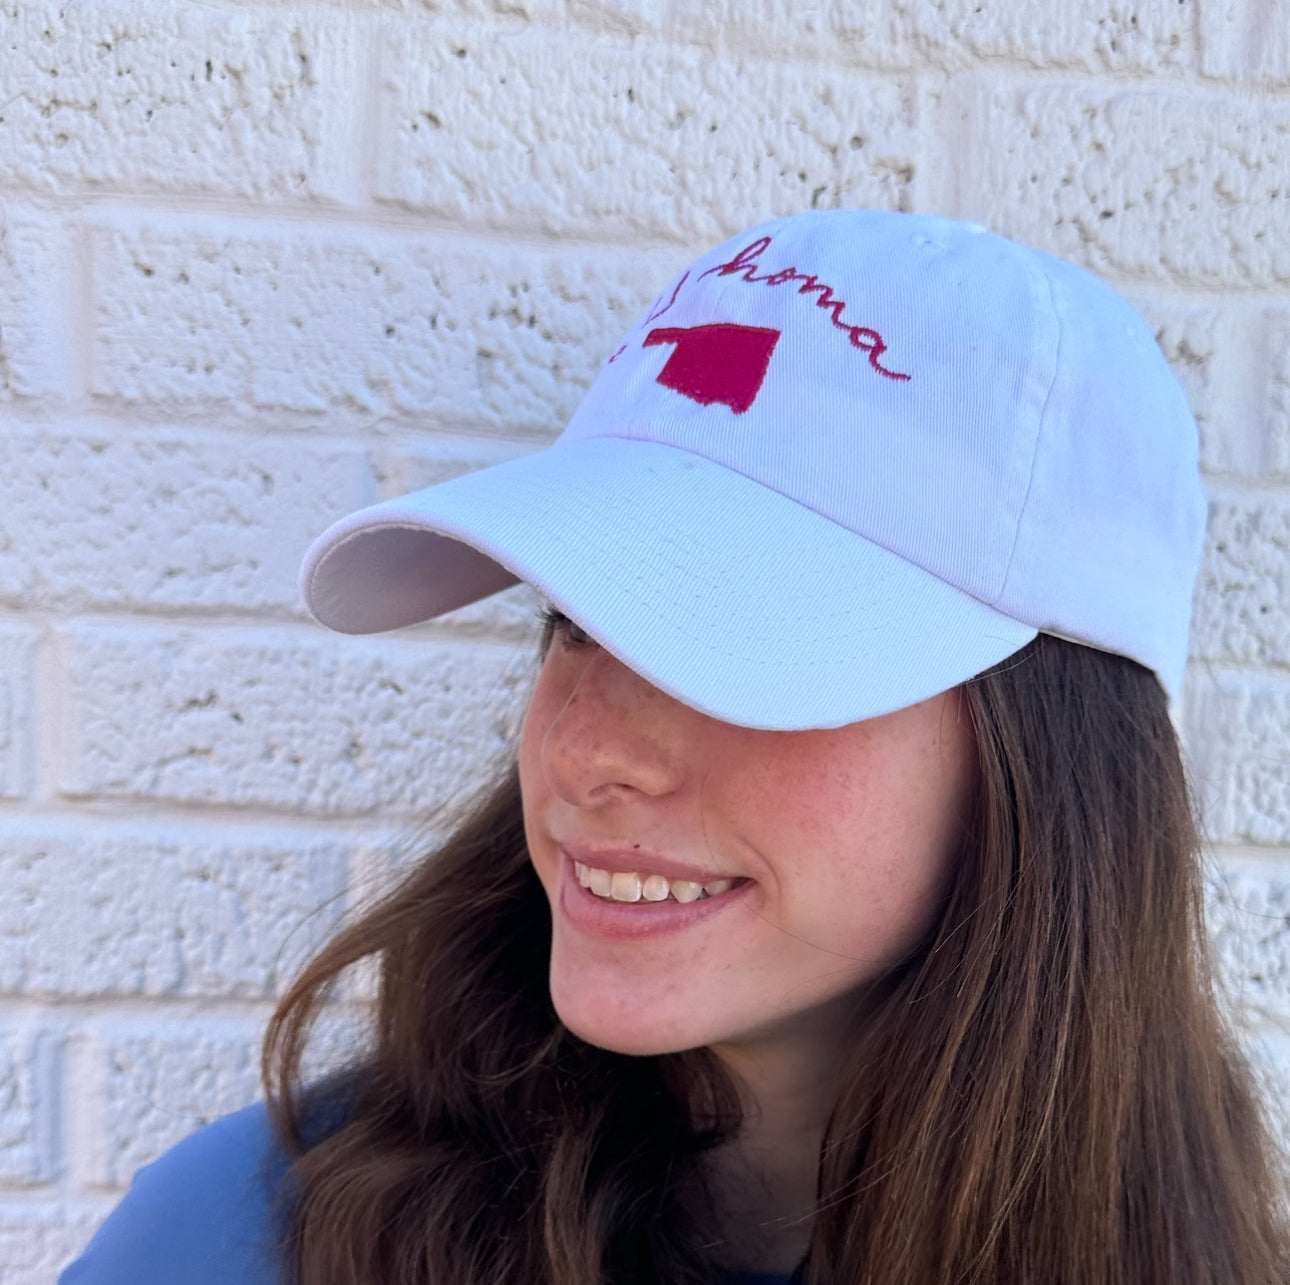 Oklahoma Spring Hat (White Cotton w/ Hot Pink Embroidery)